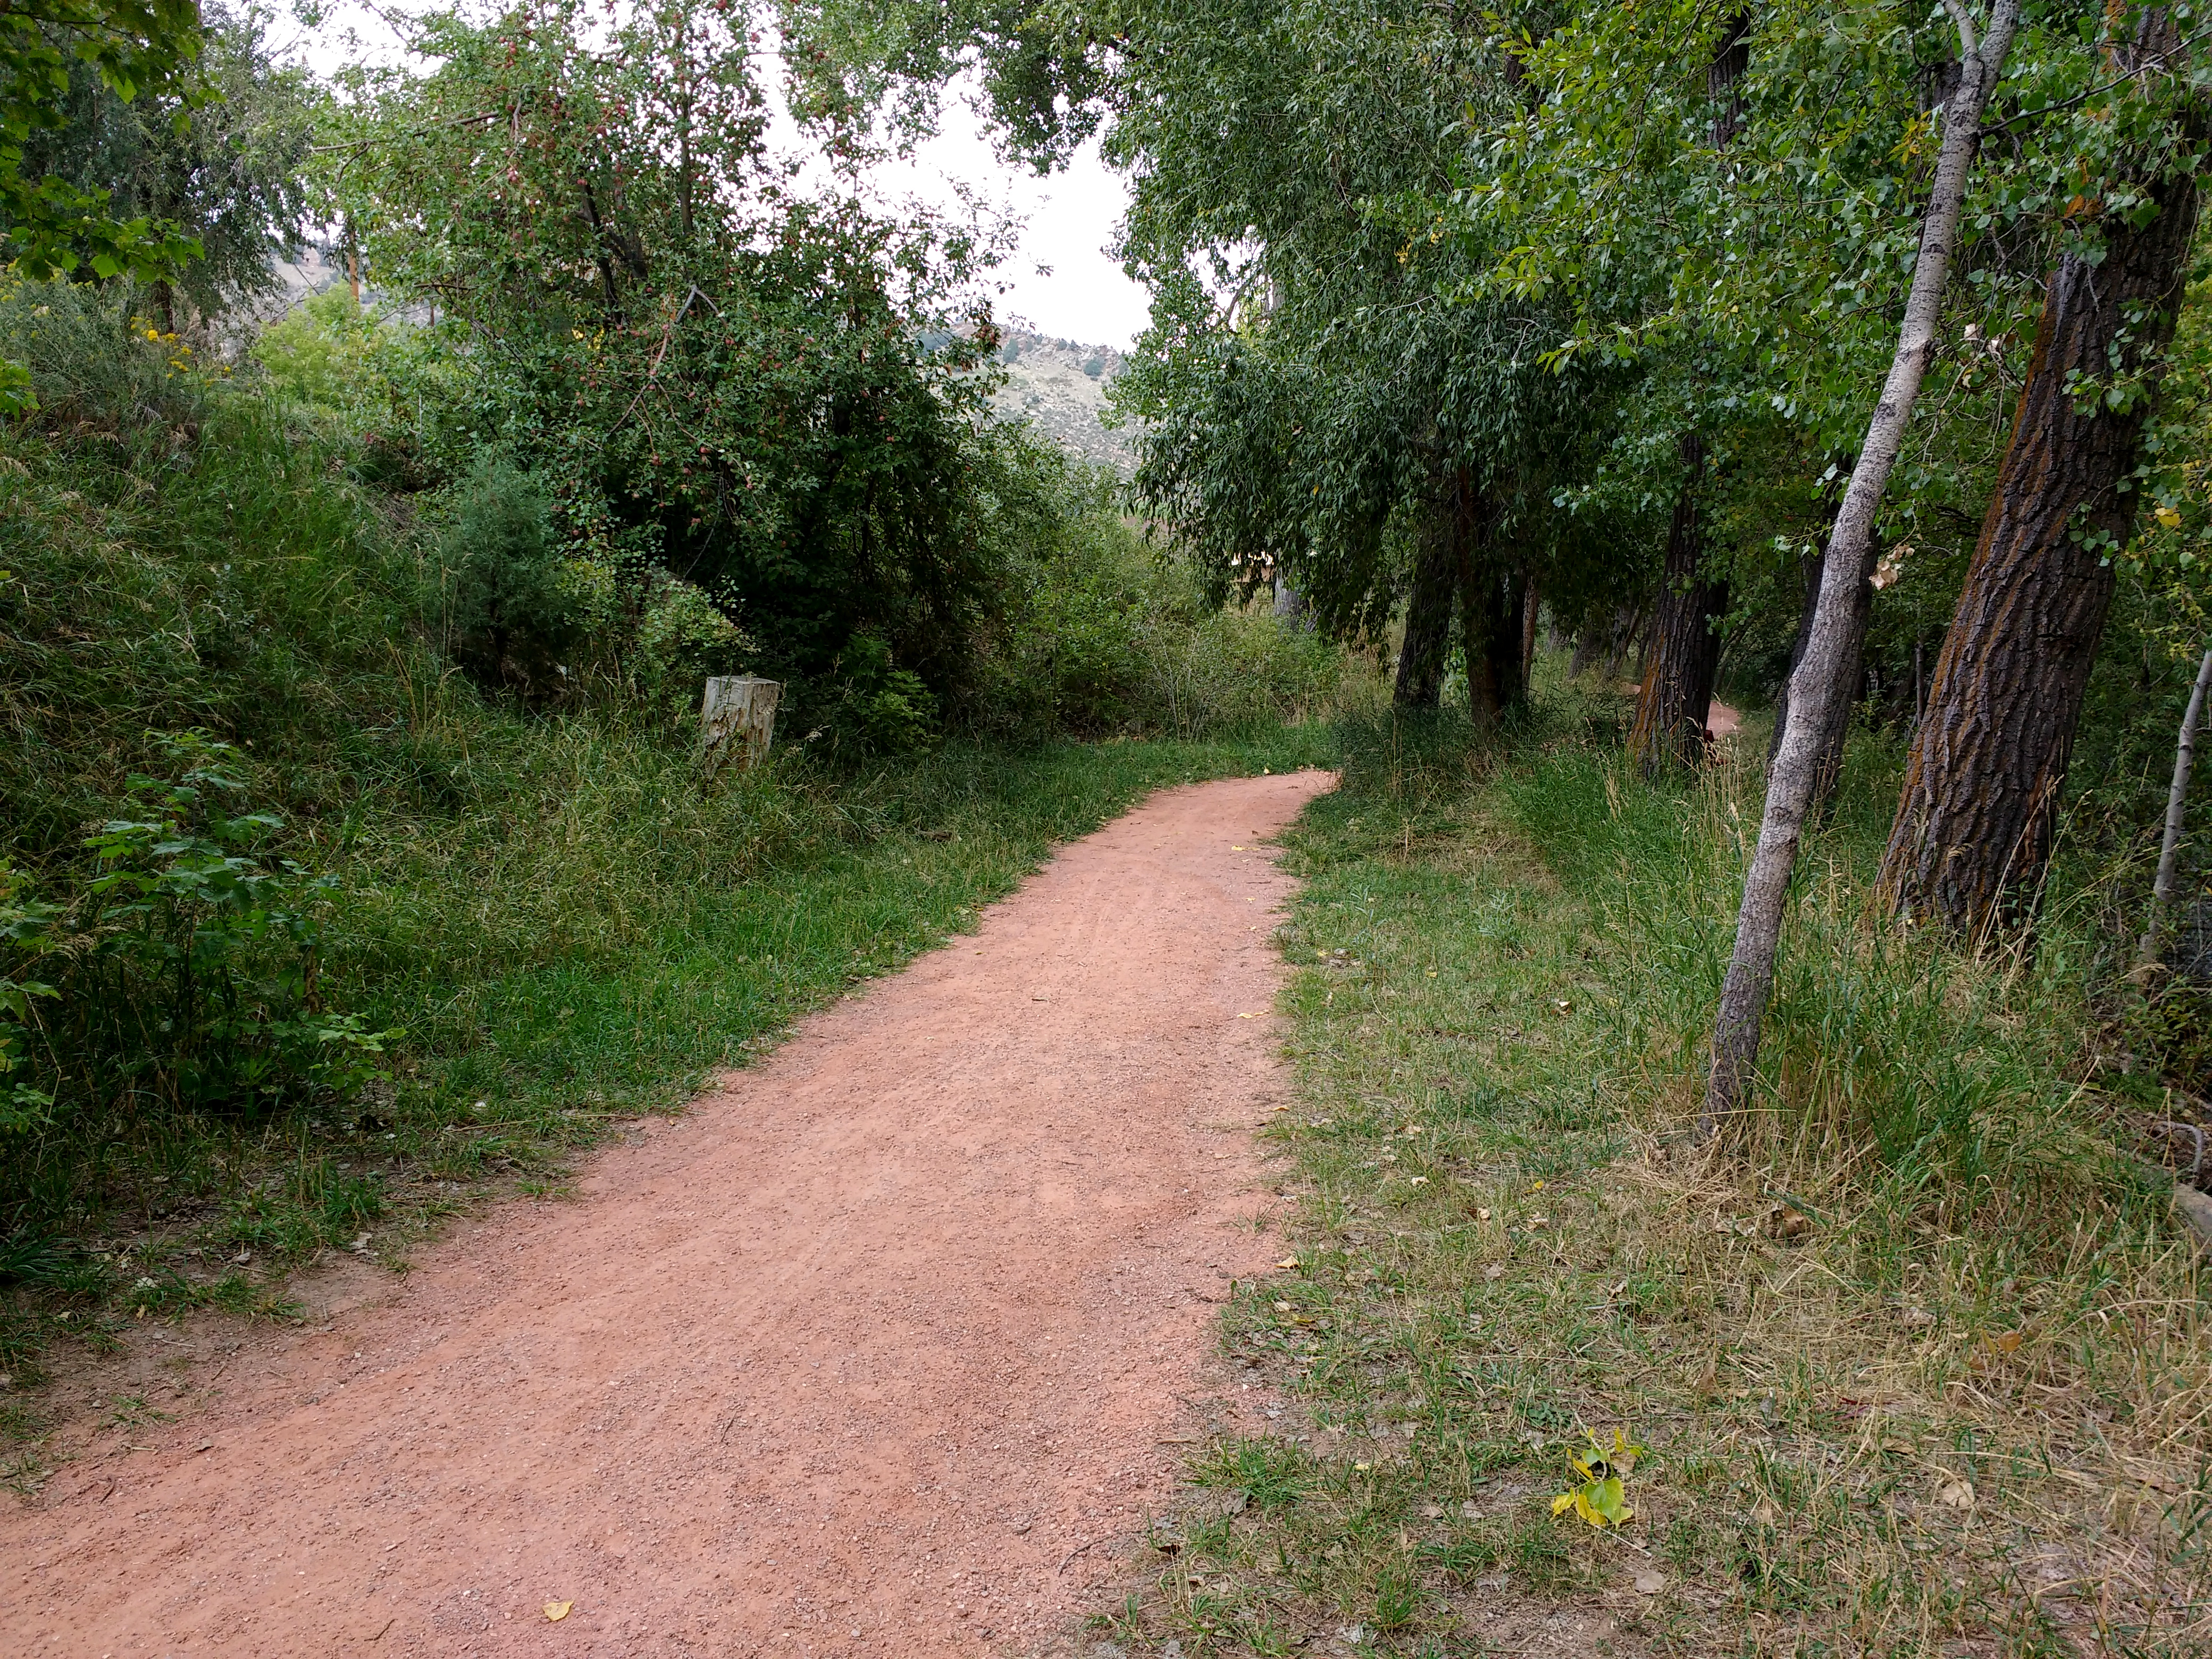 Dirt Path through Wooded Area Picture | Free Photograph | Photos ...